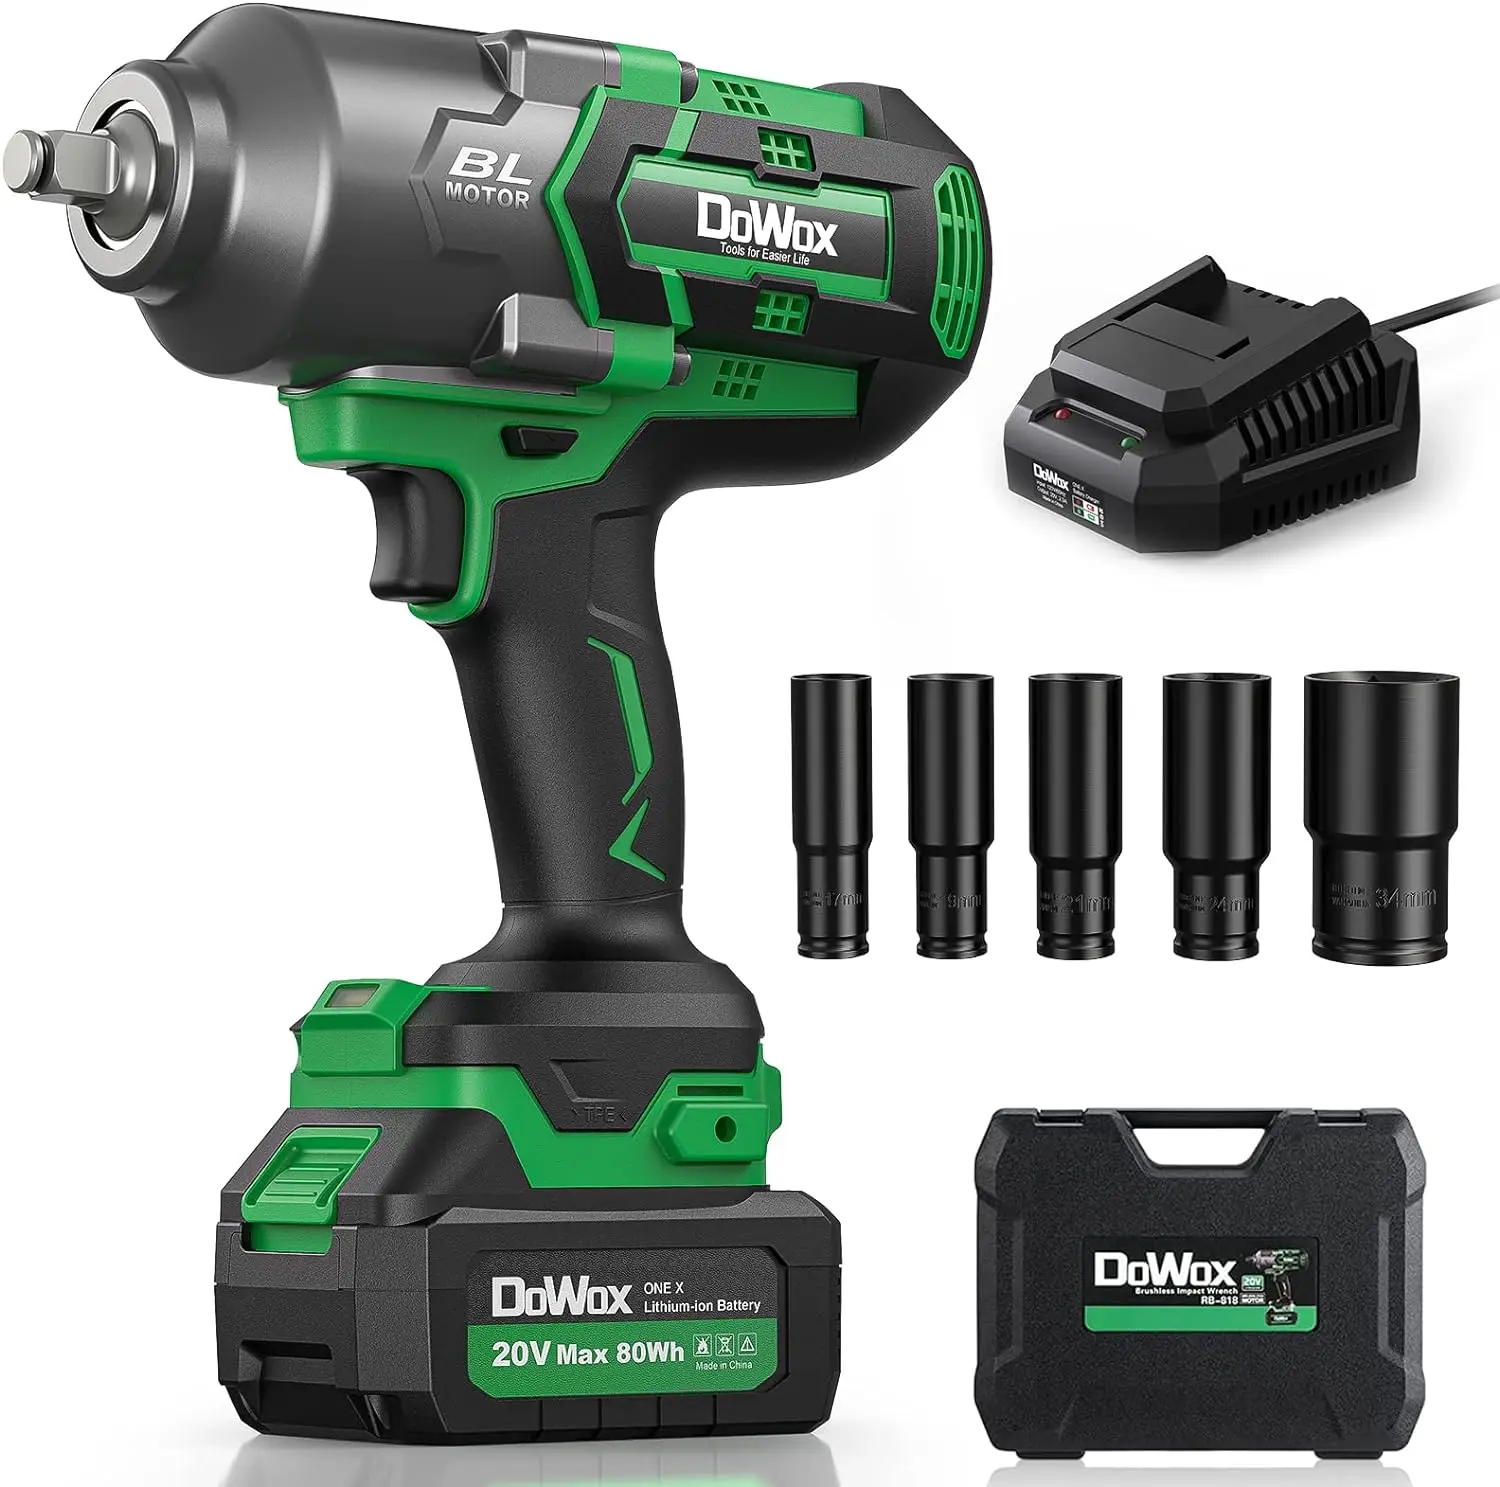 

Cordless Impact Wrench 1/2 Inch, High Torque 1200 Ft-lbs Brushless Impact Gun,20V Power 4.0 Ah Battery,Fast Charger,5 Pcs Socket